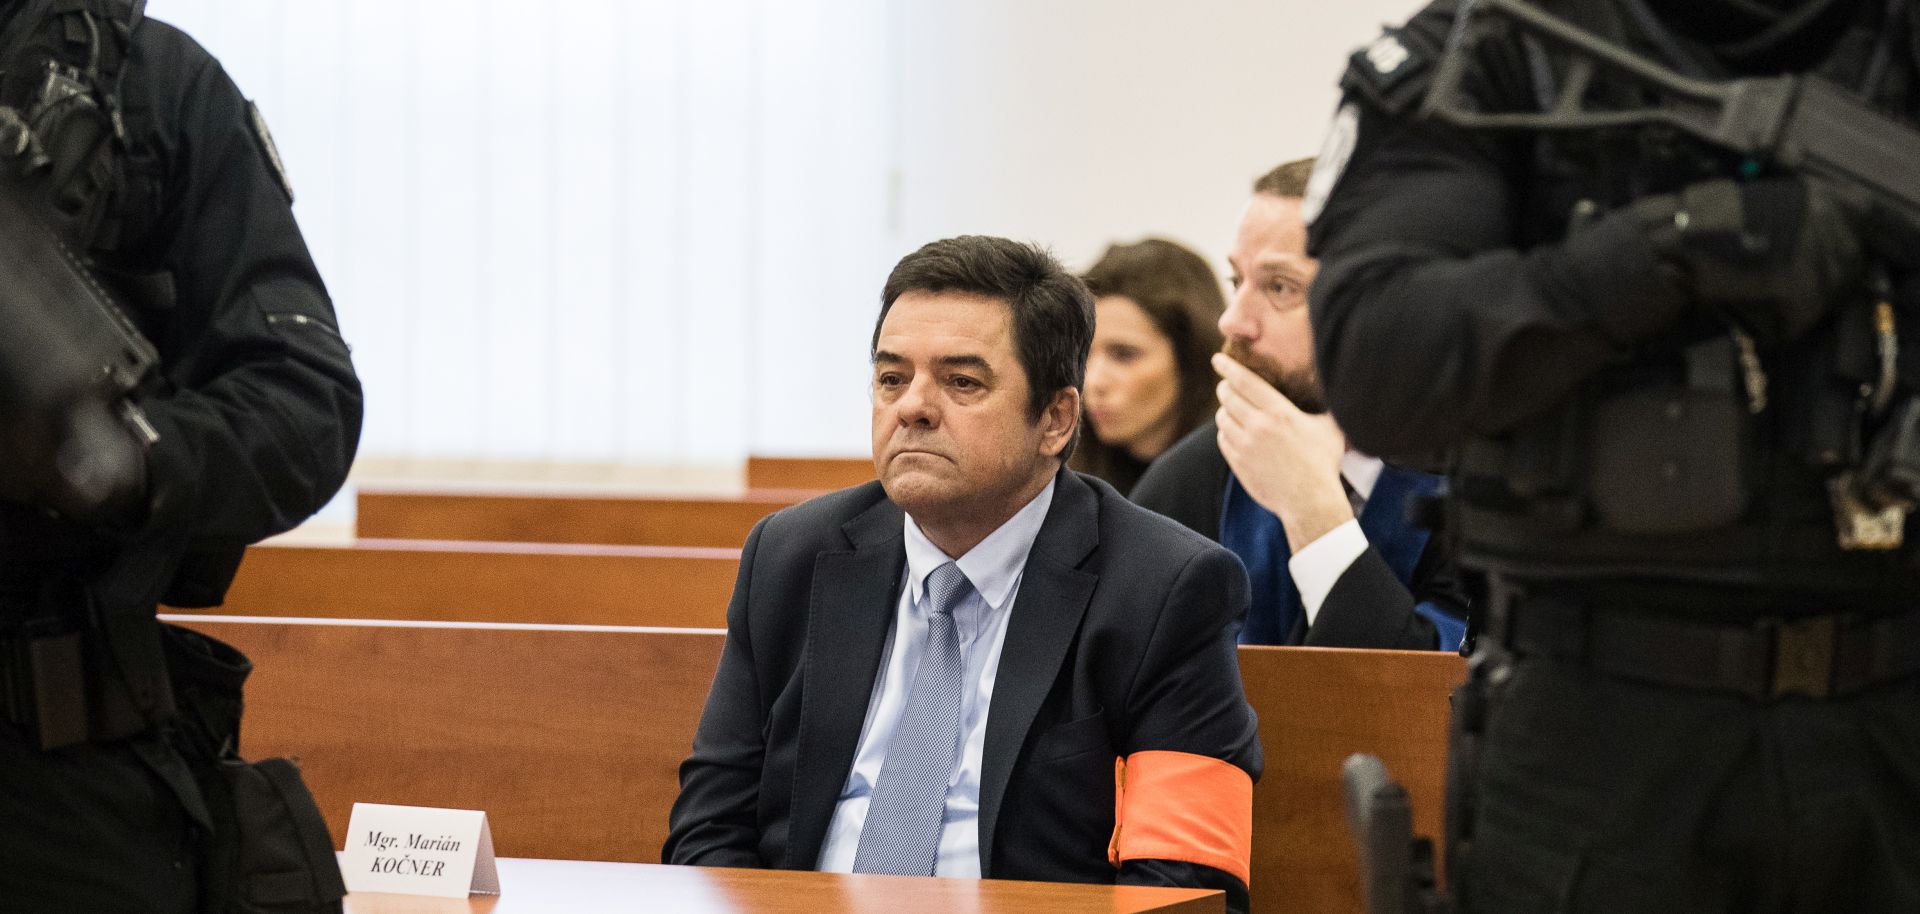 epa08081169 Marian Kocner (C) looks on at the begging of a preliminary hearing of an indictment before the main trial concerning the murder of journalist Jan Kuciak and his fiance Martina Kusnirova in the Judicial Academy building in Pezinok, Slovakia, 19 December 2019. The prosecutor of the Special Prosecutor’s Office filed criminal charges against Marian Kocner, Tomas Szabo, Miroslav Marcek and Alena Zsuzsova on 21 October 2019. The indictment concerns six crimes, including two first-degree murders.  EPA/JAKUB GAVLAK